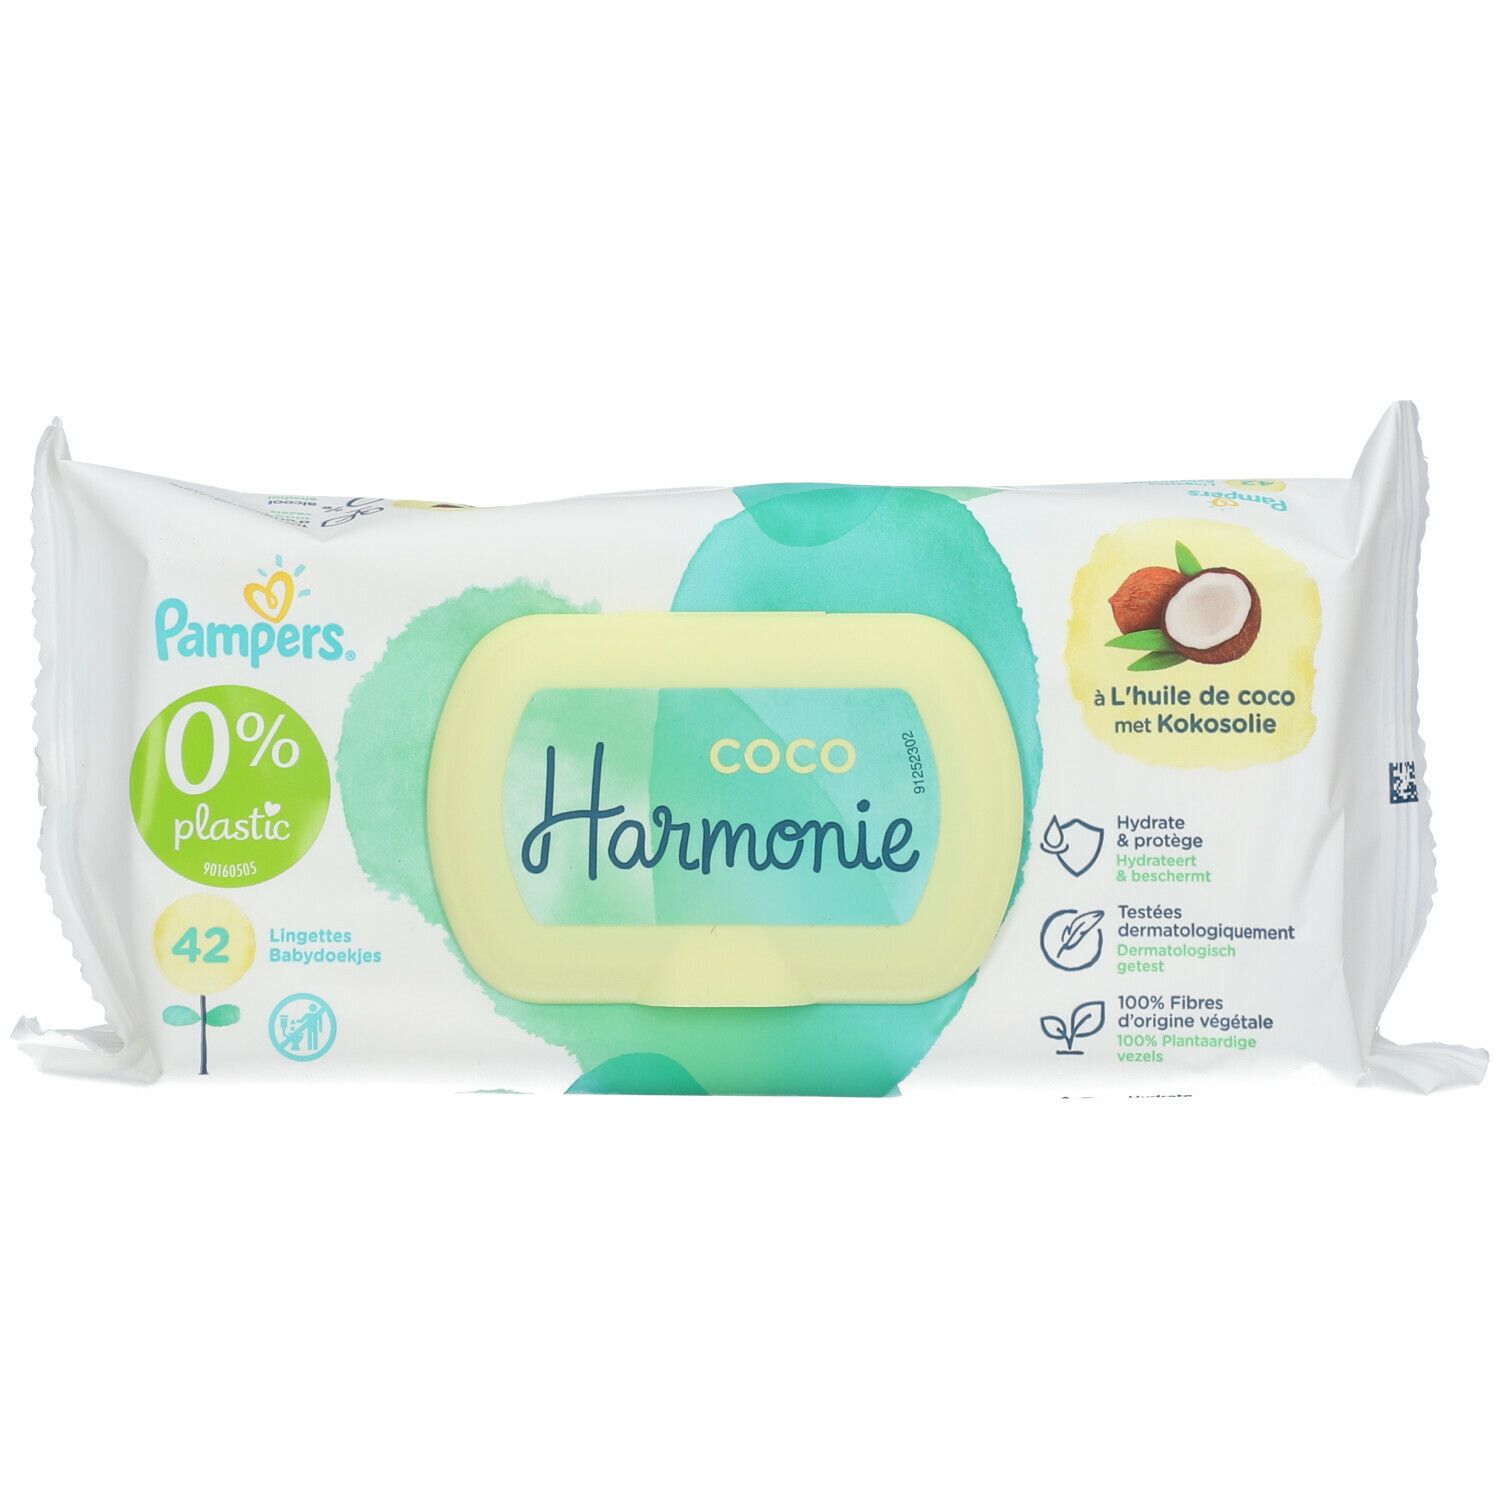 Image of Pampers® Coco Harmony Feuchttücher